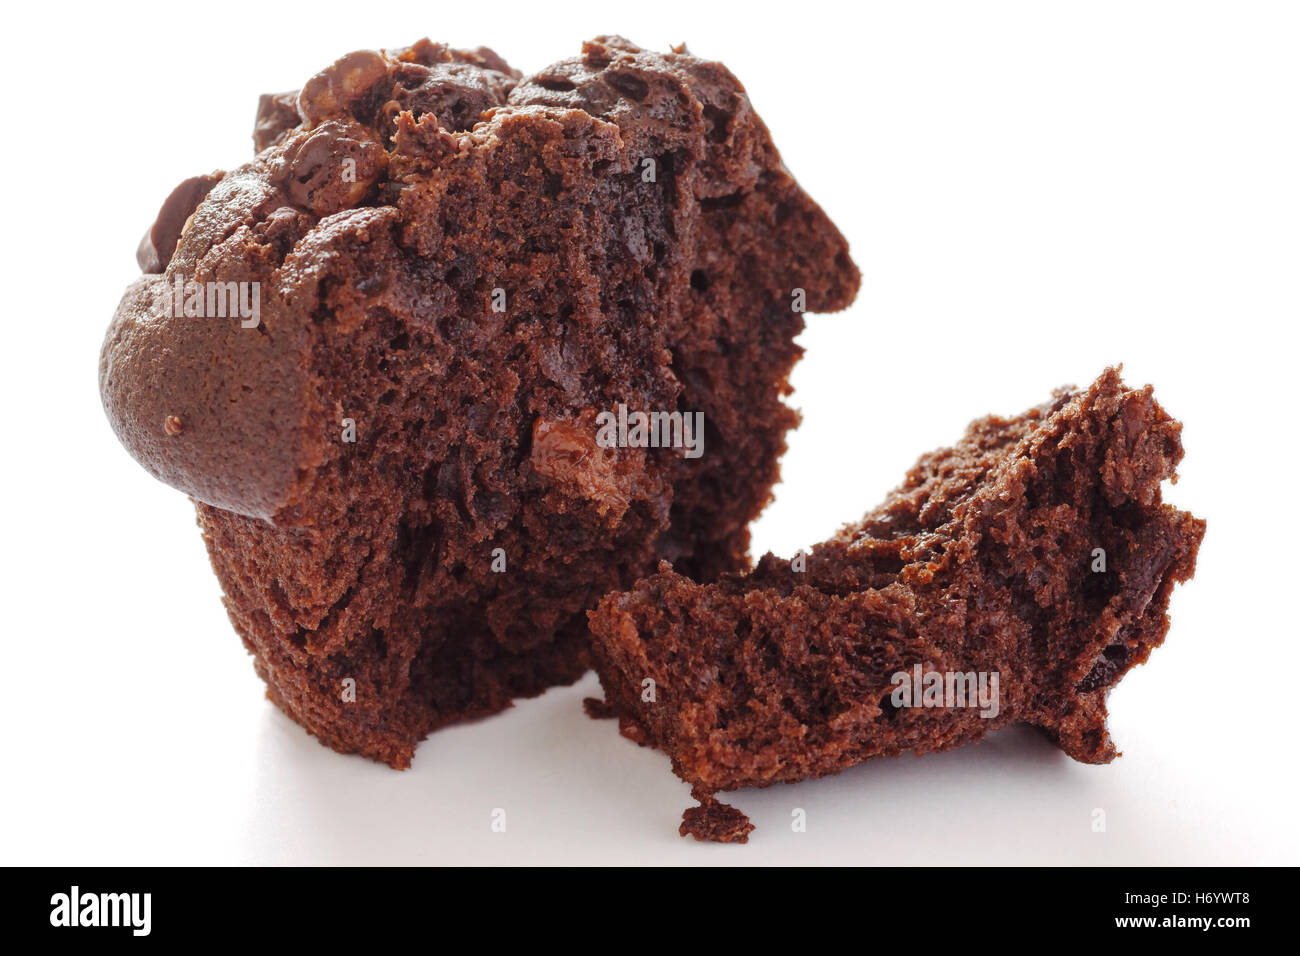 Chocolate chip muffin on white background Stock Photo